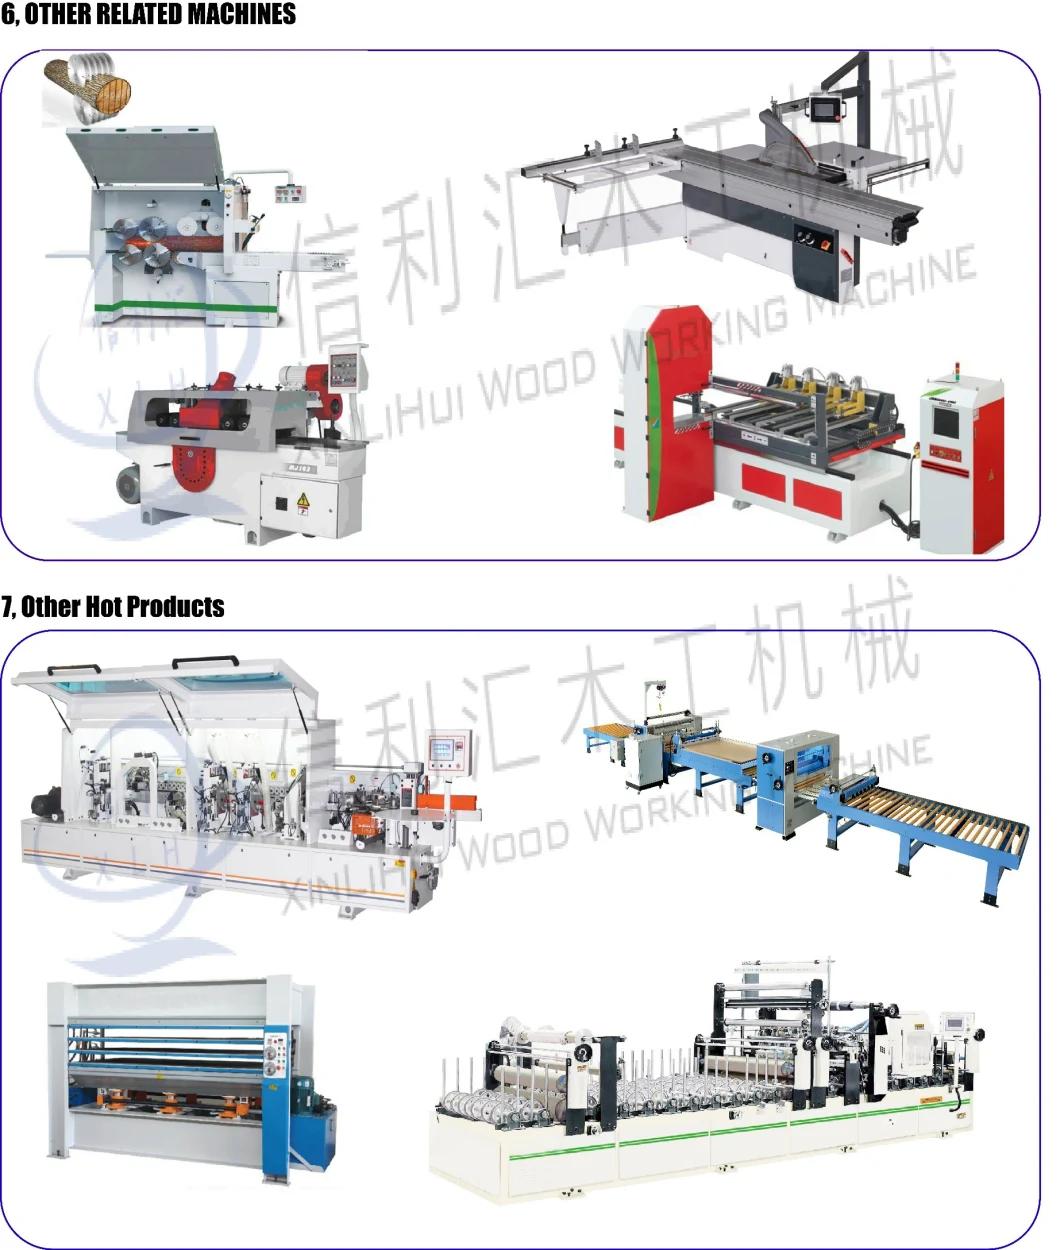 Multi Rip Saw for Wet Square Wood/ Square Wood Working Saws/ Square Log Cutting Machine